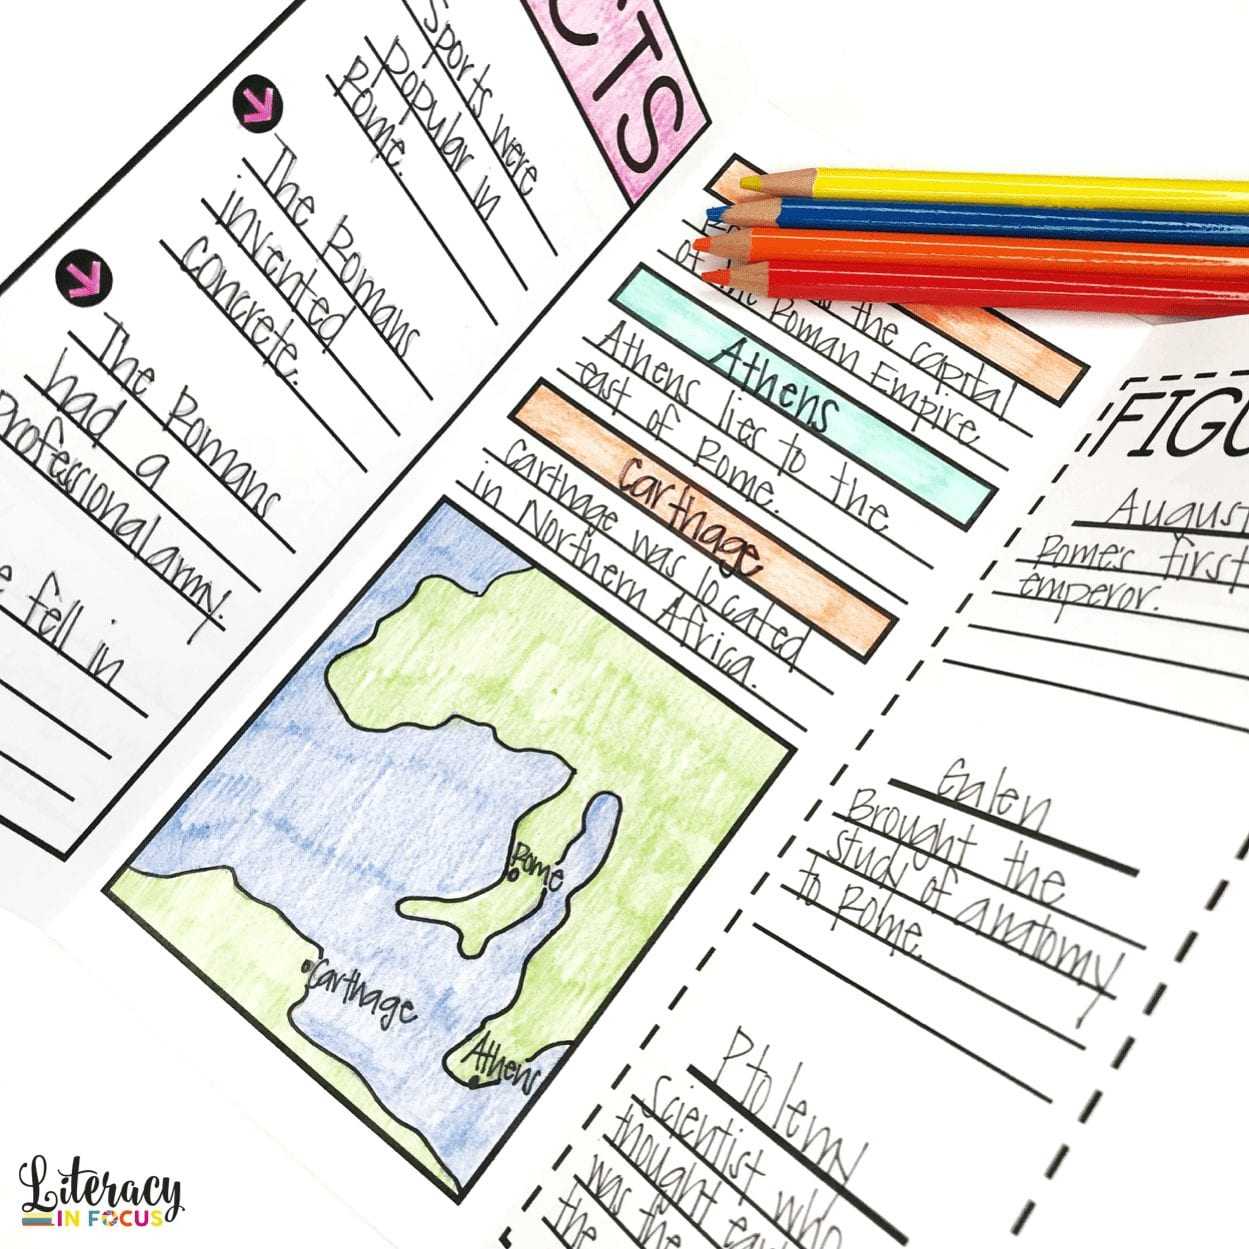 Historical Travel Brochure And Research Project | Literacy Intended For Brochure Rubric Template